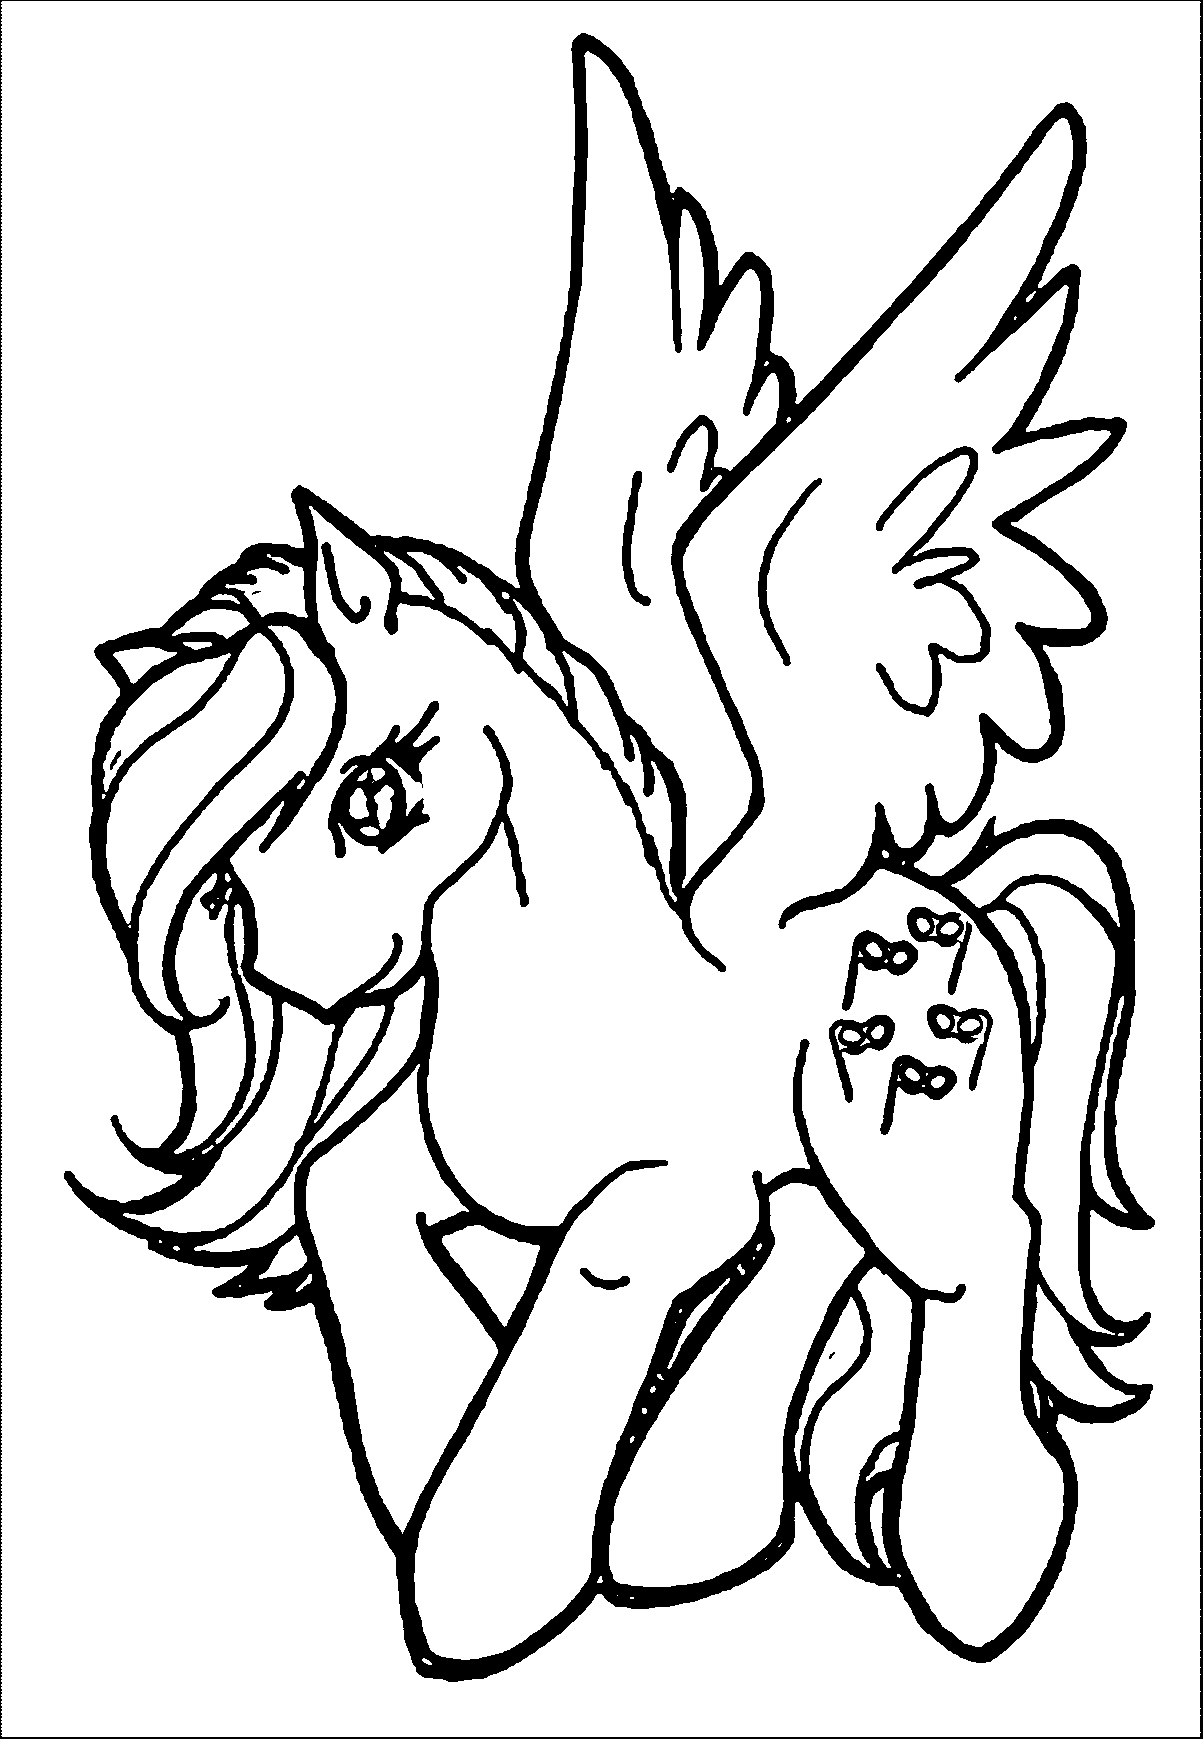 Clip art my little pony kids we coloring page